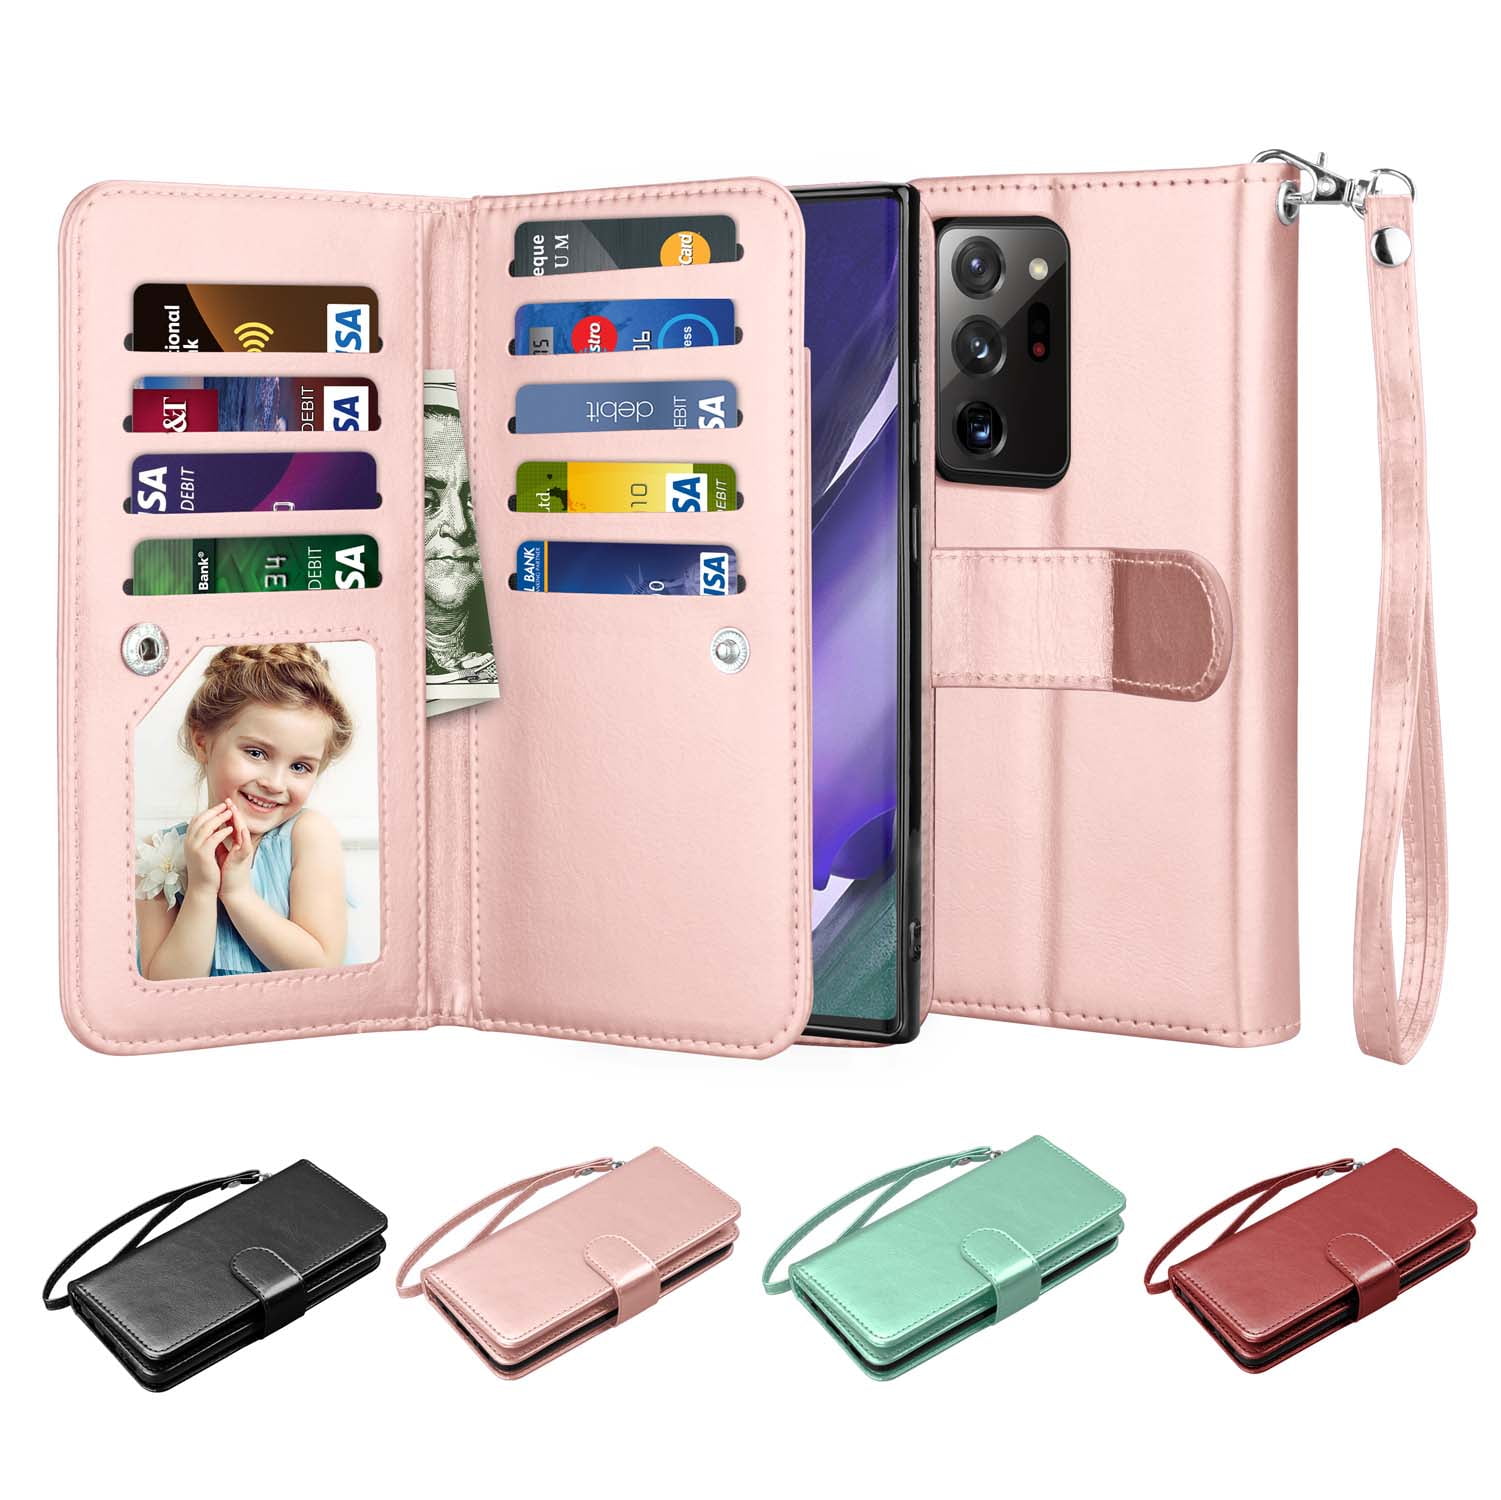 floral Galaxy Note 20 wallet Galaxy Note 20 Ultra case Galaxy Note 10 case Galaxy Note 10 wallet